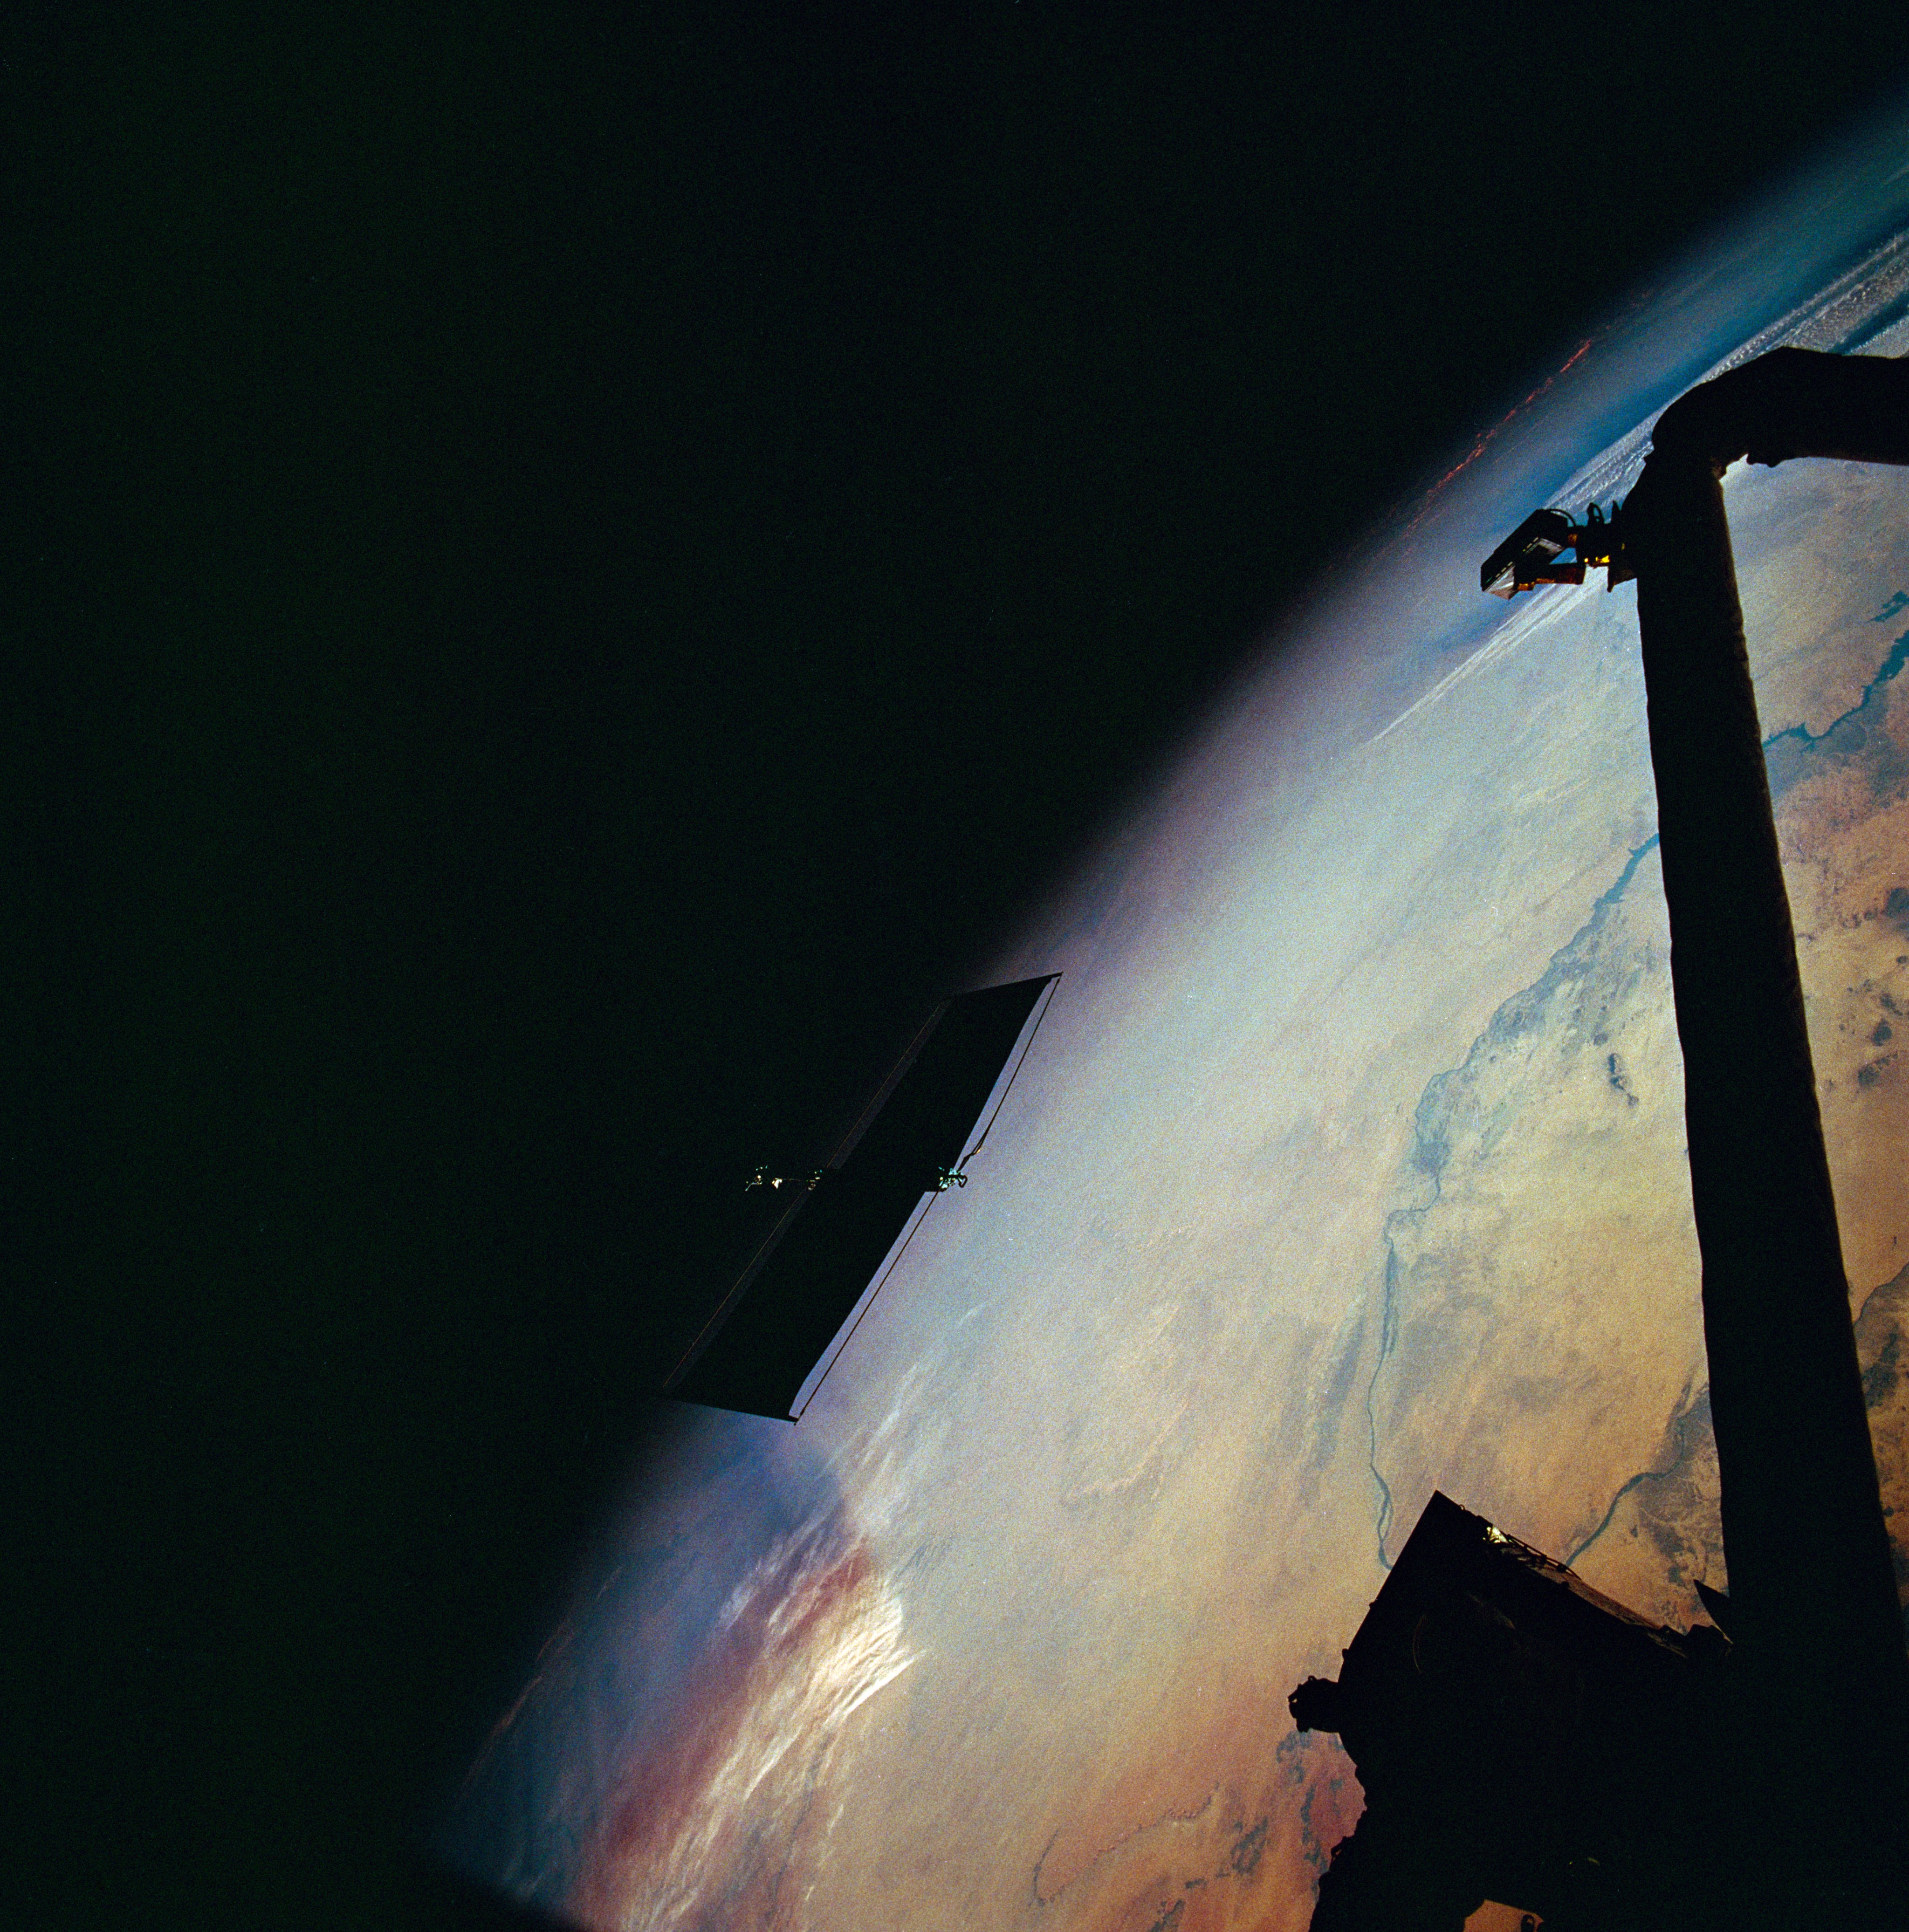 A solar panel, seen almost entirely in shadow, floats away against the backdrop of Earth.